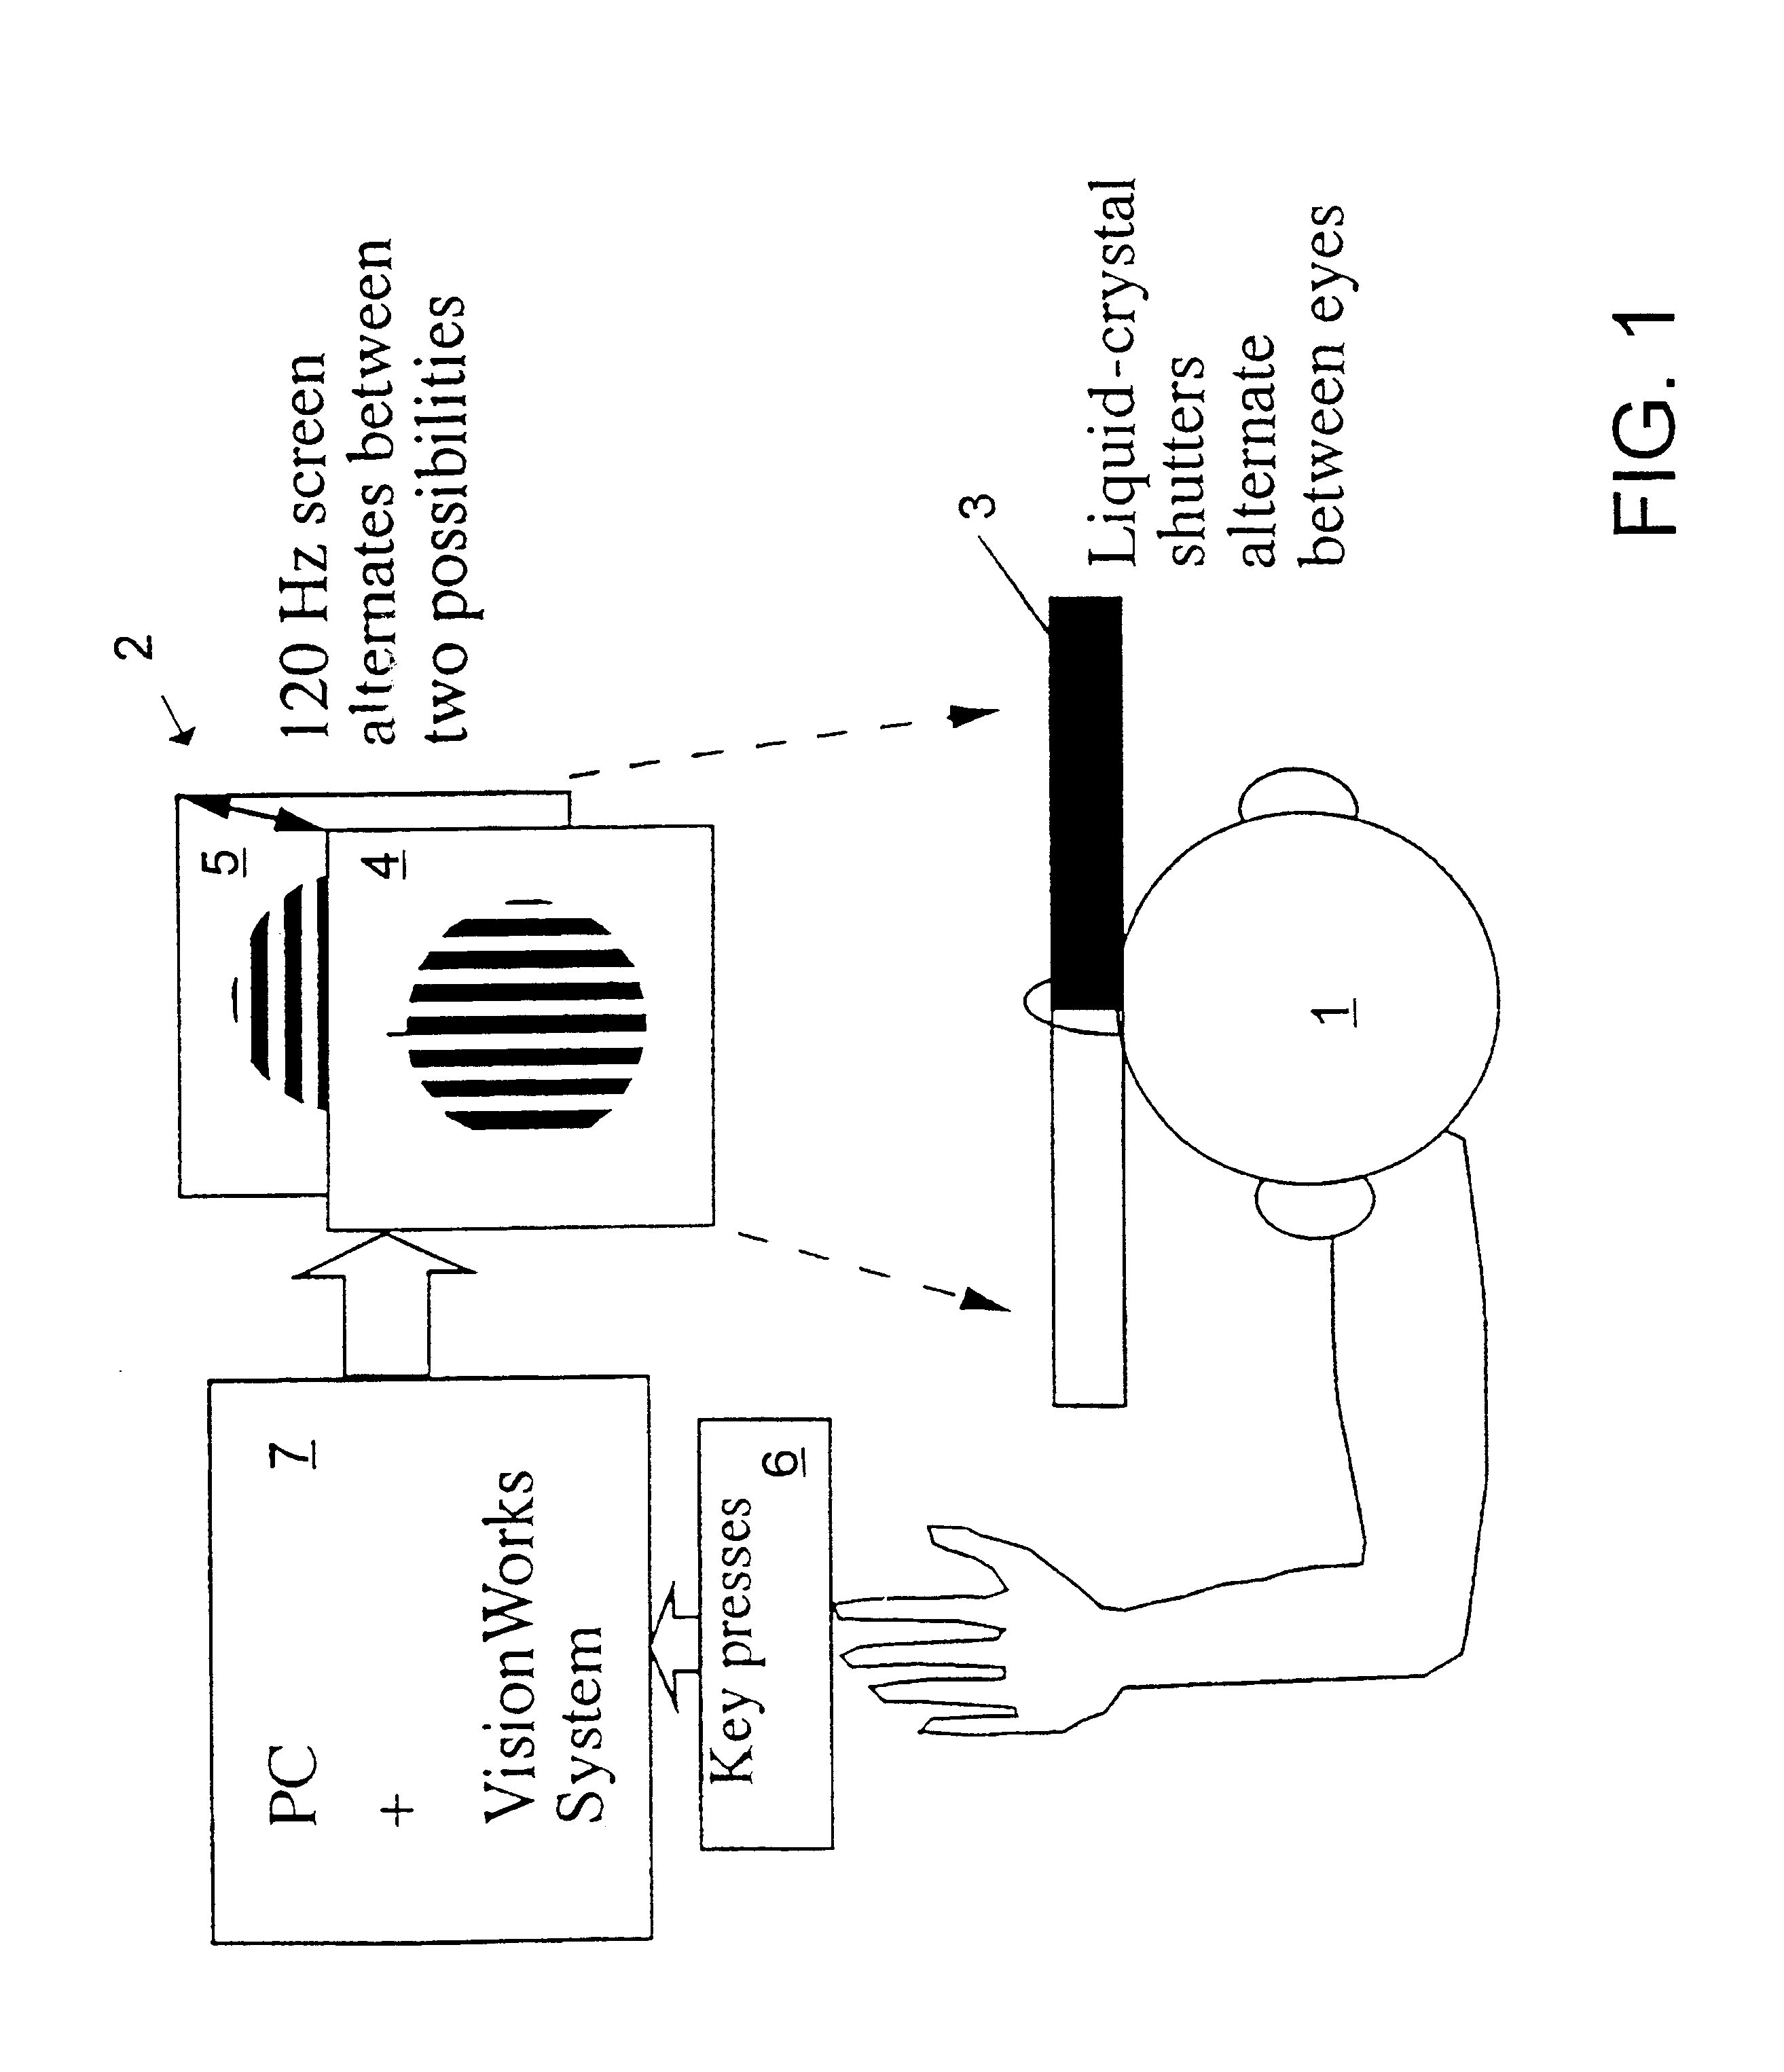 Method and apparatus for diagnosis of a mood disorder or predisposition therefor